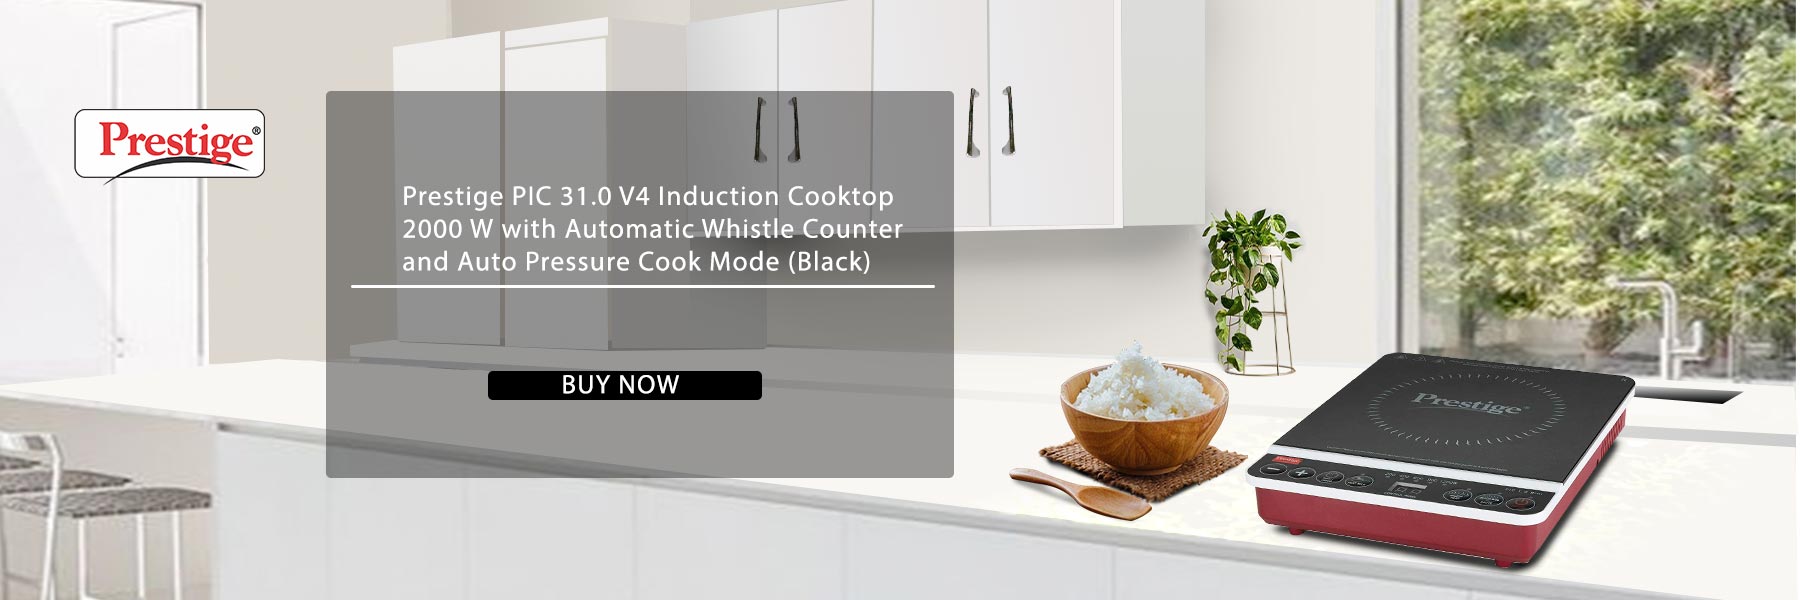 Prestige PIC 31.0 V4 Induction Cooktop 2000 W with Automatic Whistle Counter and Auto Pressure Cook Mode (Black)